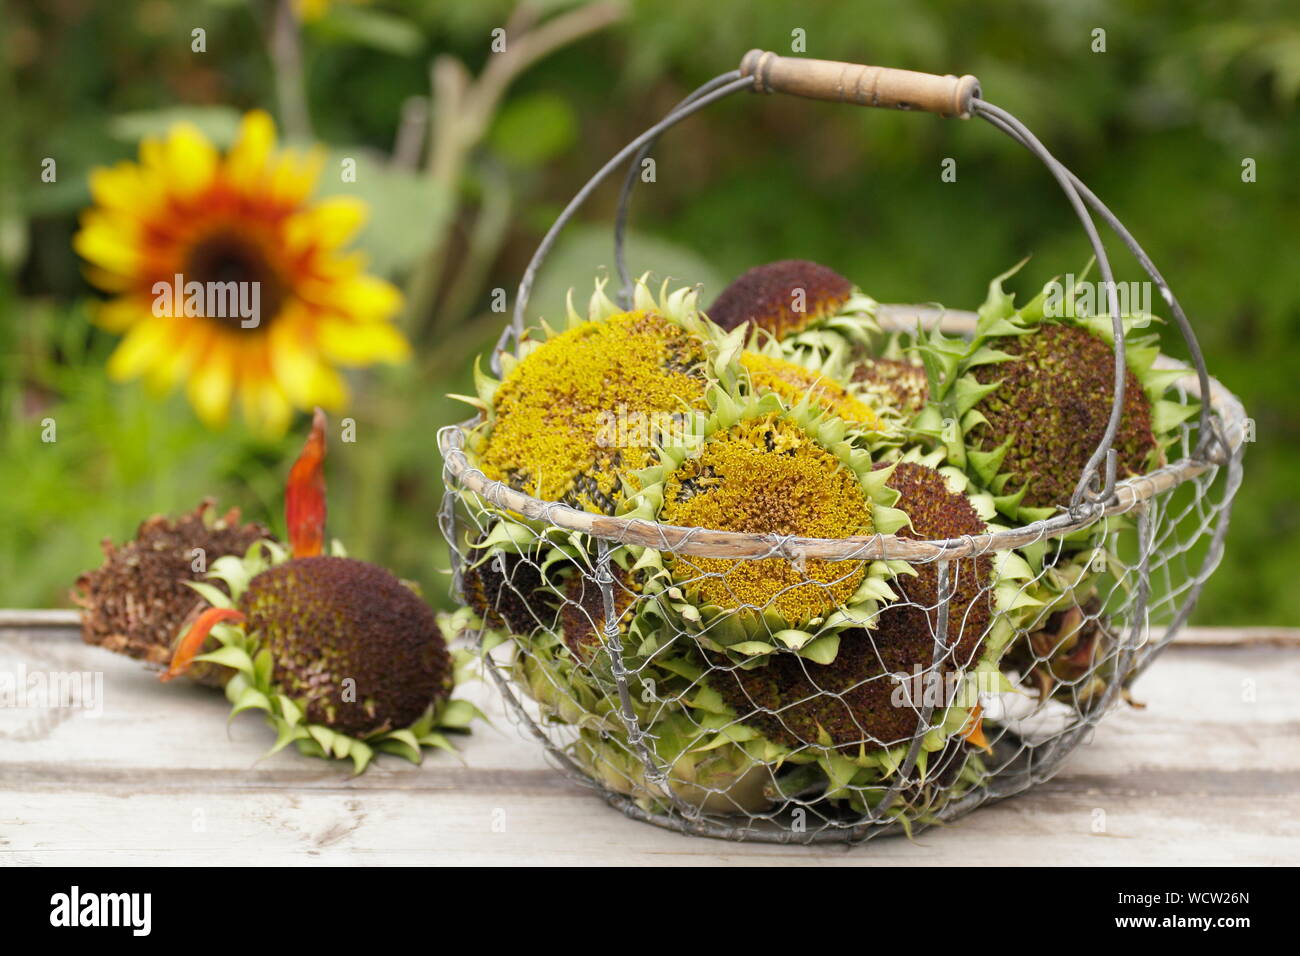 Helianthus annuus. Sunflower seedheads collected into a wire basket for drying Stock Photo